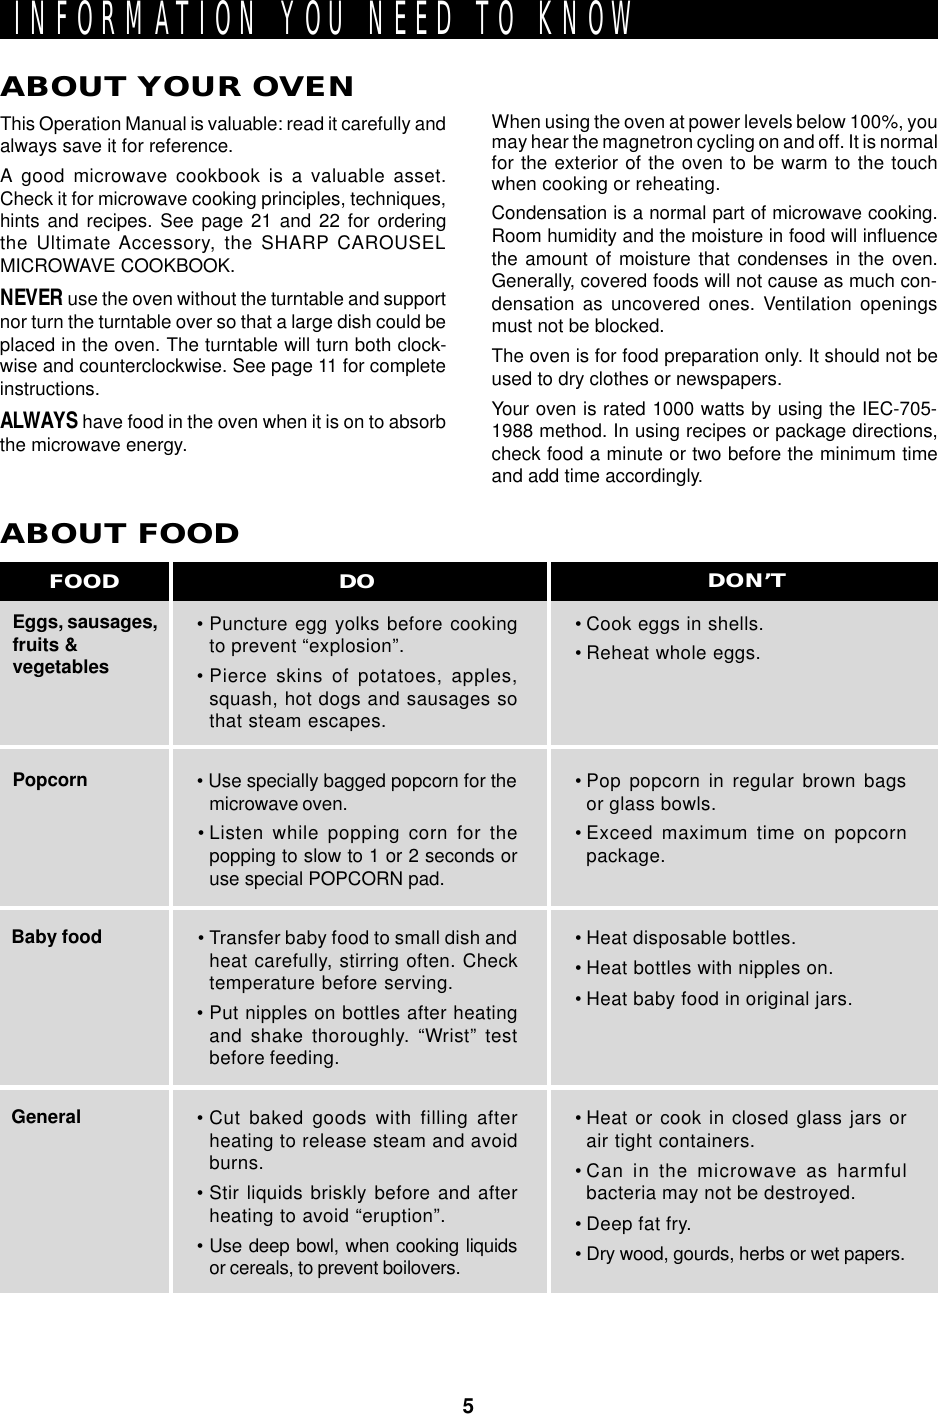 5INFORMATION YOU NEED TO KNOWABOUT YOUR OVENThis Operation Manual is valuable: read it carefully andalways save it for reference.A good microwave cookbook is a valuable asset.Check it for microwave cooking principles, techniques,hints and recipes. See page 21 and 22 for orderingthe Ultimate Accessory, the SHARP CAROUSELMICROWAVE COOKBOOK.NEVER use the oven without the turntable and supportnor turn the turntable over so that a large dish could beplaced in the oven. The turntable will turn both clock-wise and counterclockwise. See page 11 for completeinstructions.ALWAYS have food in the oven when it is on to absorbthe microwave energy.When using the oven at power levels below 100%, youmay hear the magnetron cycling on and off. It is normalfor the exterior of the oven to be warm to the touchwhen cooking or reheating.Condensation is a normal part of microwave cooking.Room humidity and the moisture in food will influencethe amount of moisture that condenses in the oven.Generally, covered foods will not cause as much con-densation as uncovered ones. Ventilation openingsmust not be blocked.The oven is for food preparation only. It should not beused to dry clothes or newspapers.Your oven is rated 1000 watts by using the IEC-705-1988 method. In using recipes or package directions,check food a minute or two before the minimum timeand add time accordingly.Eggs, sausages,fruits &amp;vegetablesPopcornBaby foodGeneralABOUT FOOD• Puncture egg yolks before cookingto prevent “explosion”.• Pierce skins of potatoes, apples,squash, hot dogs and sausages sothat steam escapes.• Use specially bagged popcorn for themicrowave oven.• Listen while popping corn for thepopping to slow to 1 or 2 seconds oruse special POPCORN pad.• Transfer baby food to small dish andheat carefully, stirring often. Checktemperature before serving.• Put nipples on bottles after heatingand shake thoroughly. “Wrist” testbefore feeding.• Cut baked goods with filling afterheating to release steam and avoidburns.• Stir liquids briskly before and afterheating to avoid “eruption”.• Use deep bowl, when cooking liquidsor cereals, to prevent boilovers.• Cook eggs in shells.• Reheat whole eggs.• Pop popcorn in regular brown bagsor glass bowls.• Exceed maximum time on popcornpackage.• Heat disposable bottles.• Heat bottles with nipples on.• Heat baby food in original jars.• Heat or cook in closed glass jars orair tight containers.• Can in the microwave as harmfulbacteria may not be destroyed.• Deep fat fry.• Dry wood, gourds, herbs or wet papers.DO DON’TFOOD